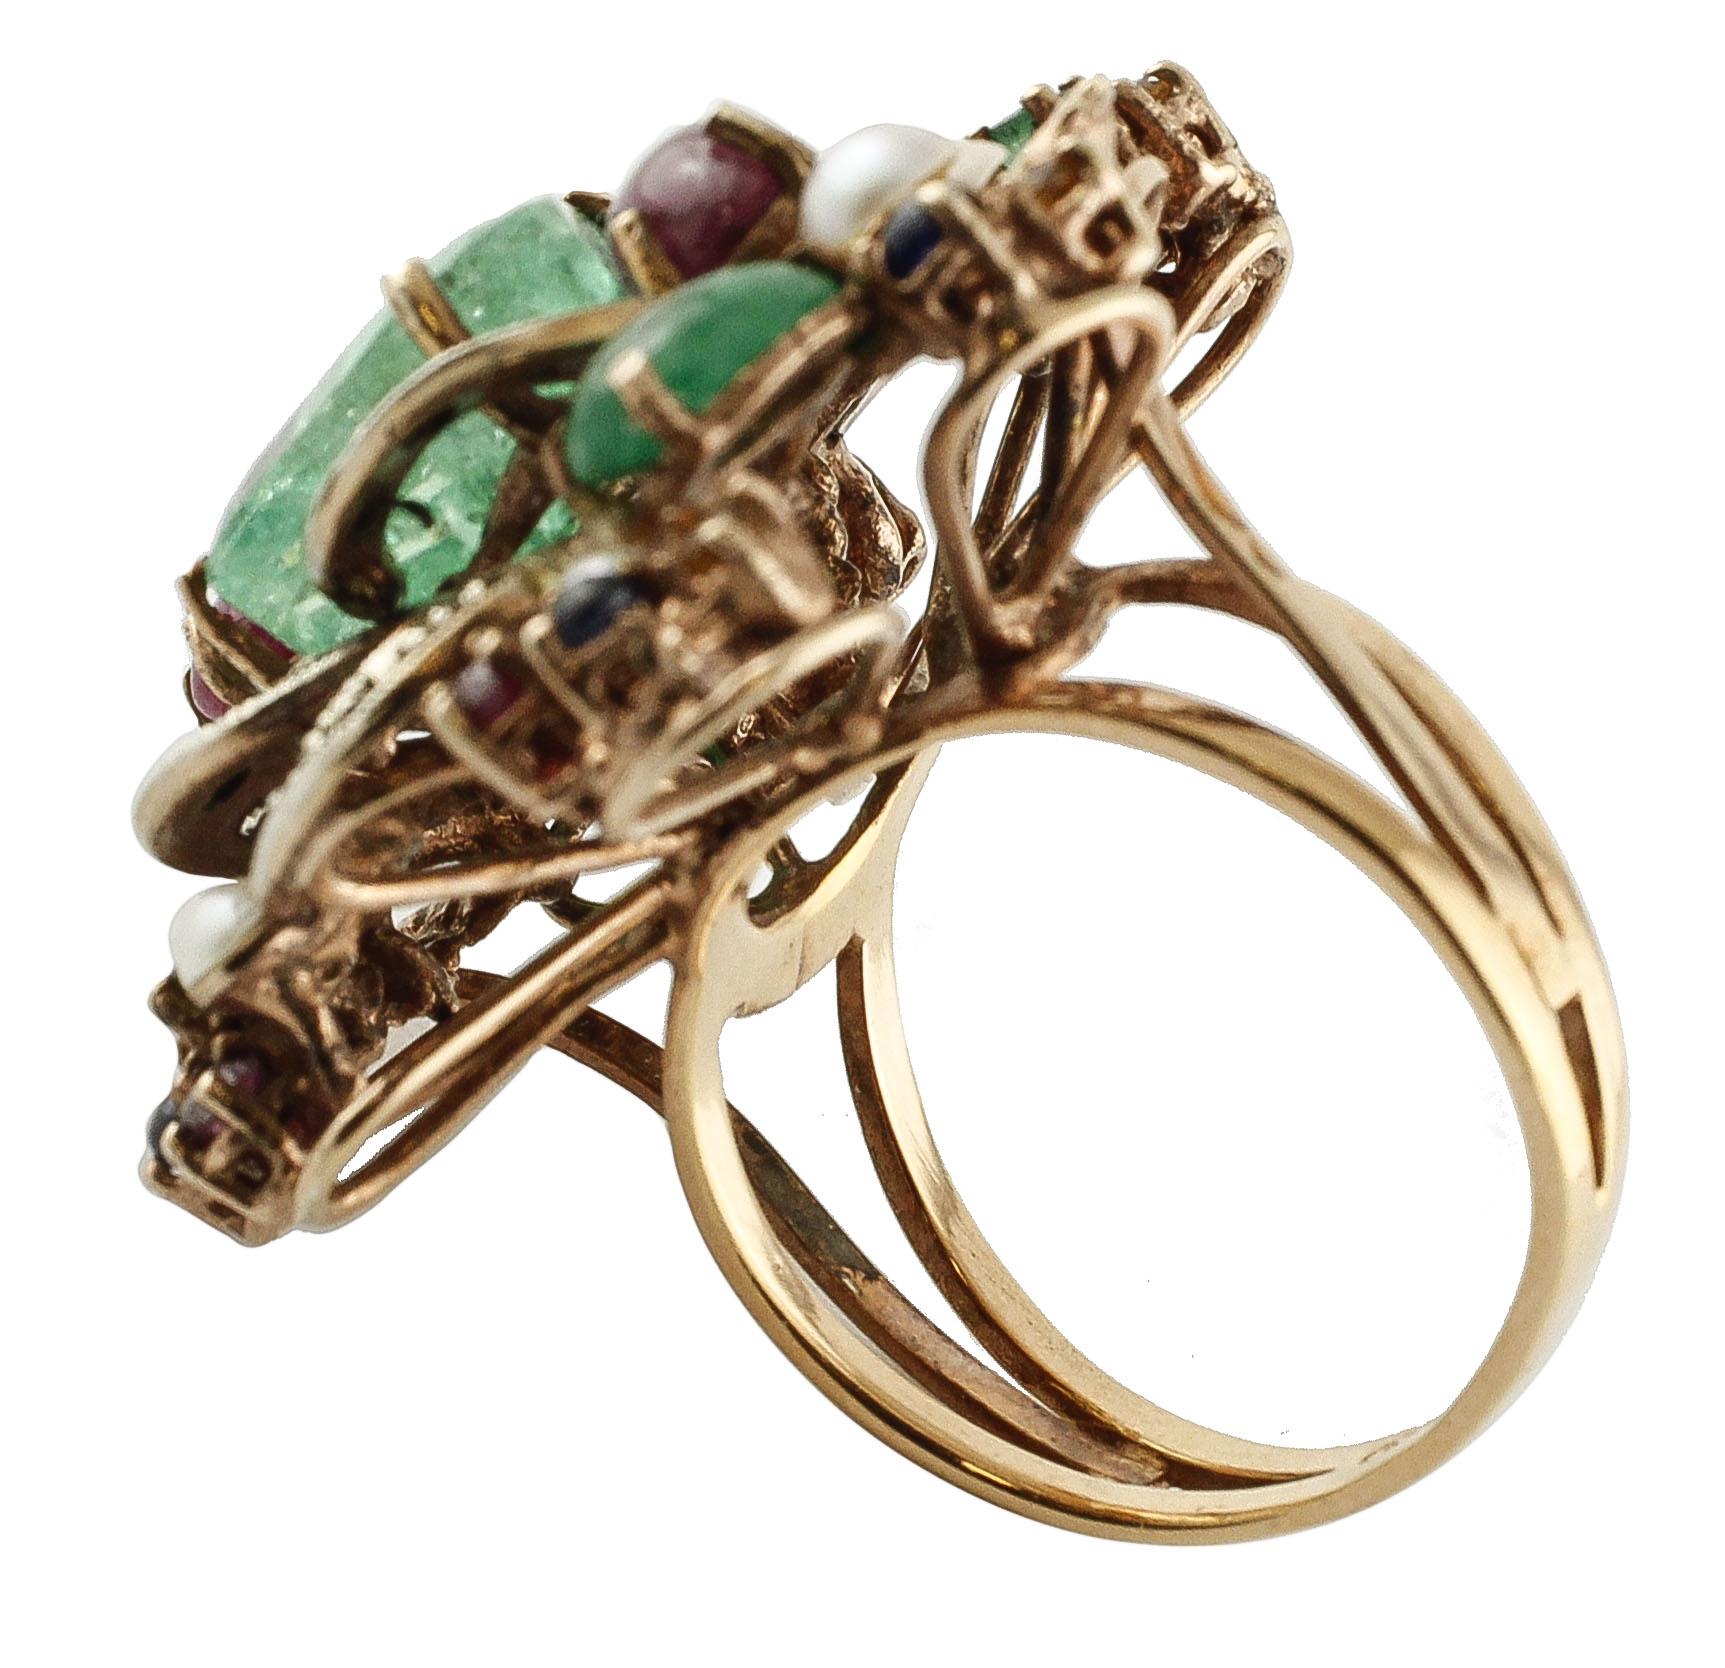 Mixed Cut Diamonds, Rubies, Emeralds, Blue Yellow Sapphires, Pearls Rose Gold Silver Ring